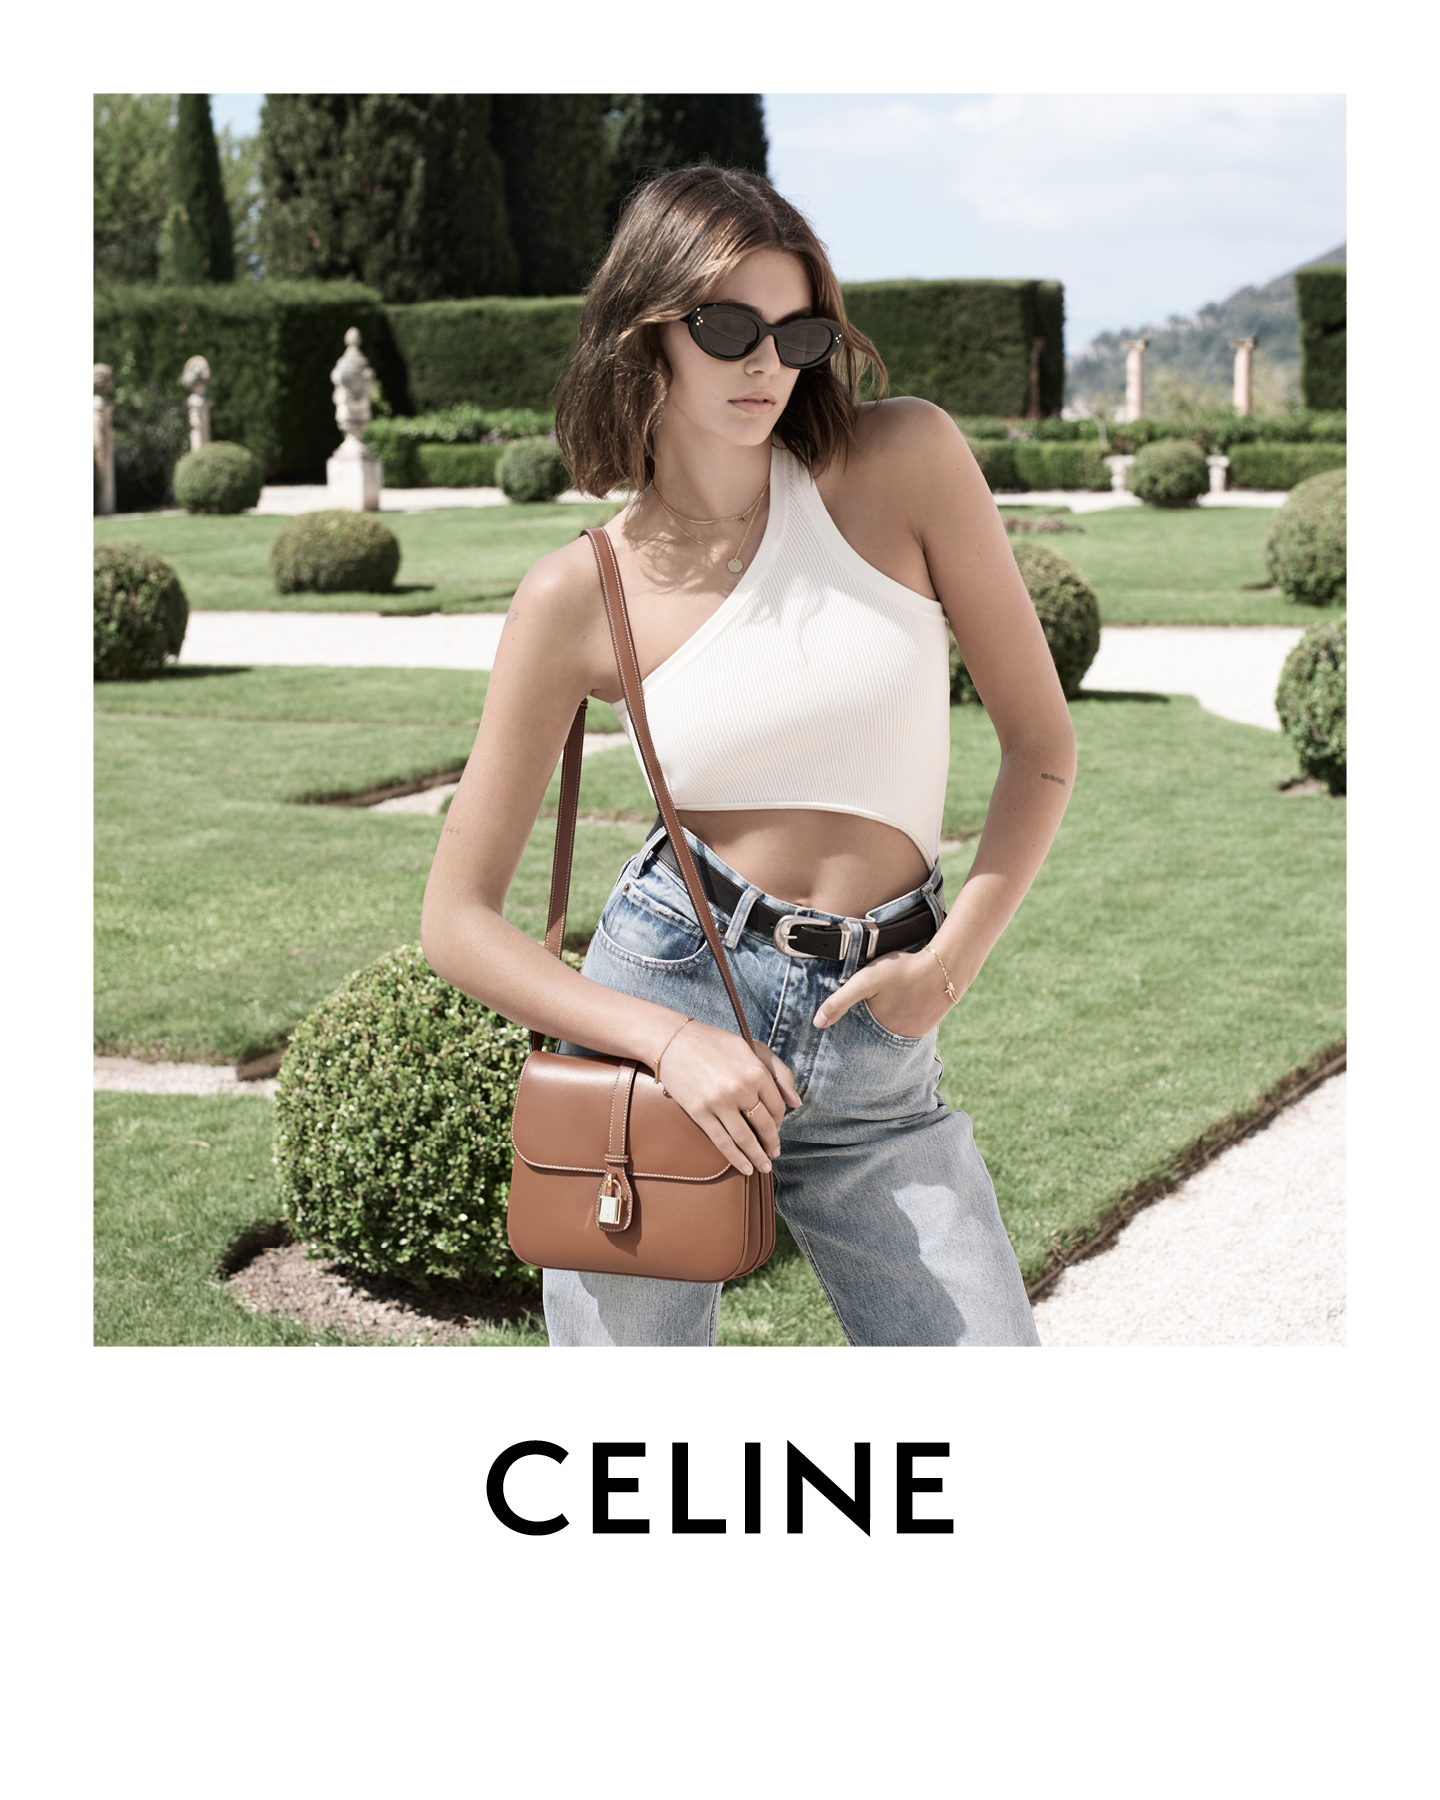 CELINE on X: CELINE WOMEN WINTER 21 PARADE INTRODUCING THE NEW